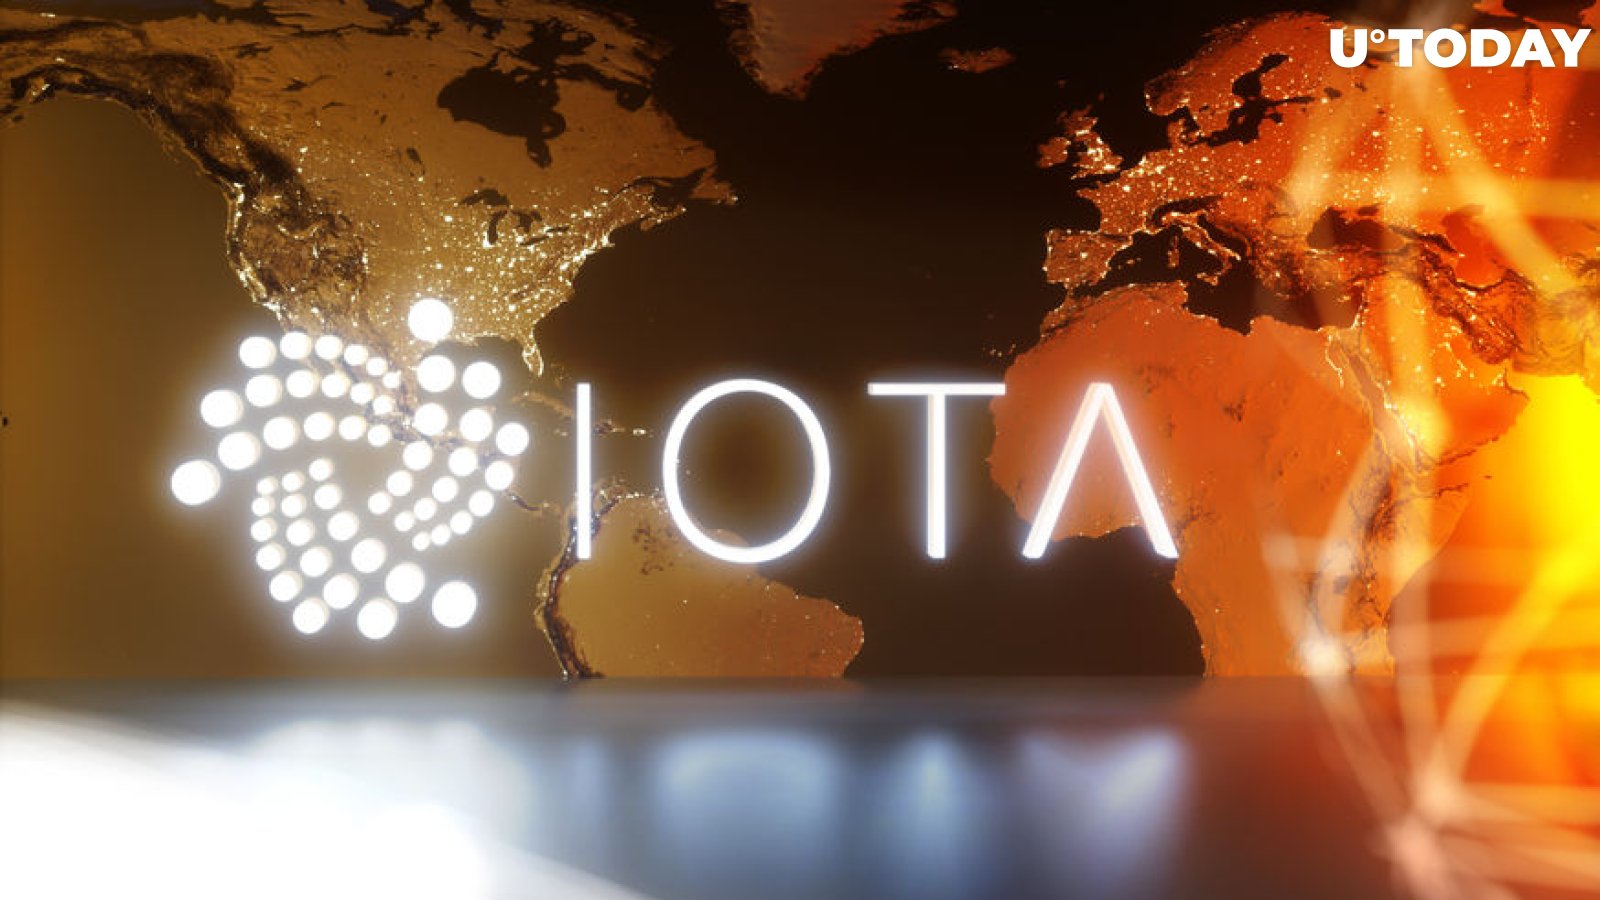  IOTA Foundation Investigating 'Coordinated Attack' That Resulted in Stolen Funds